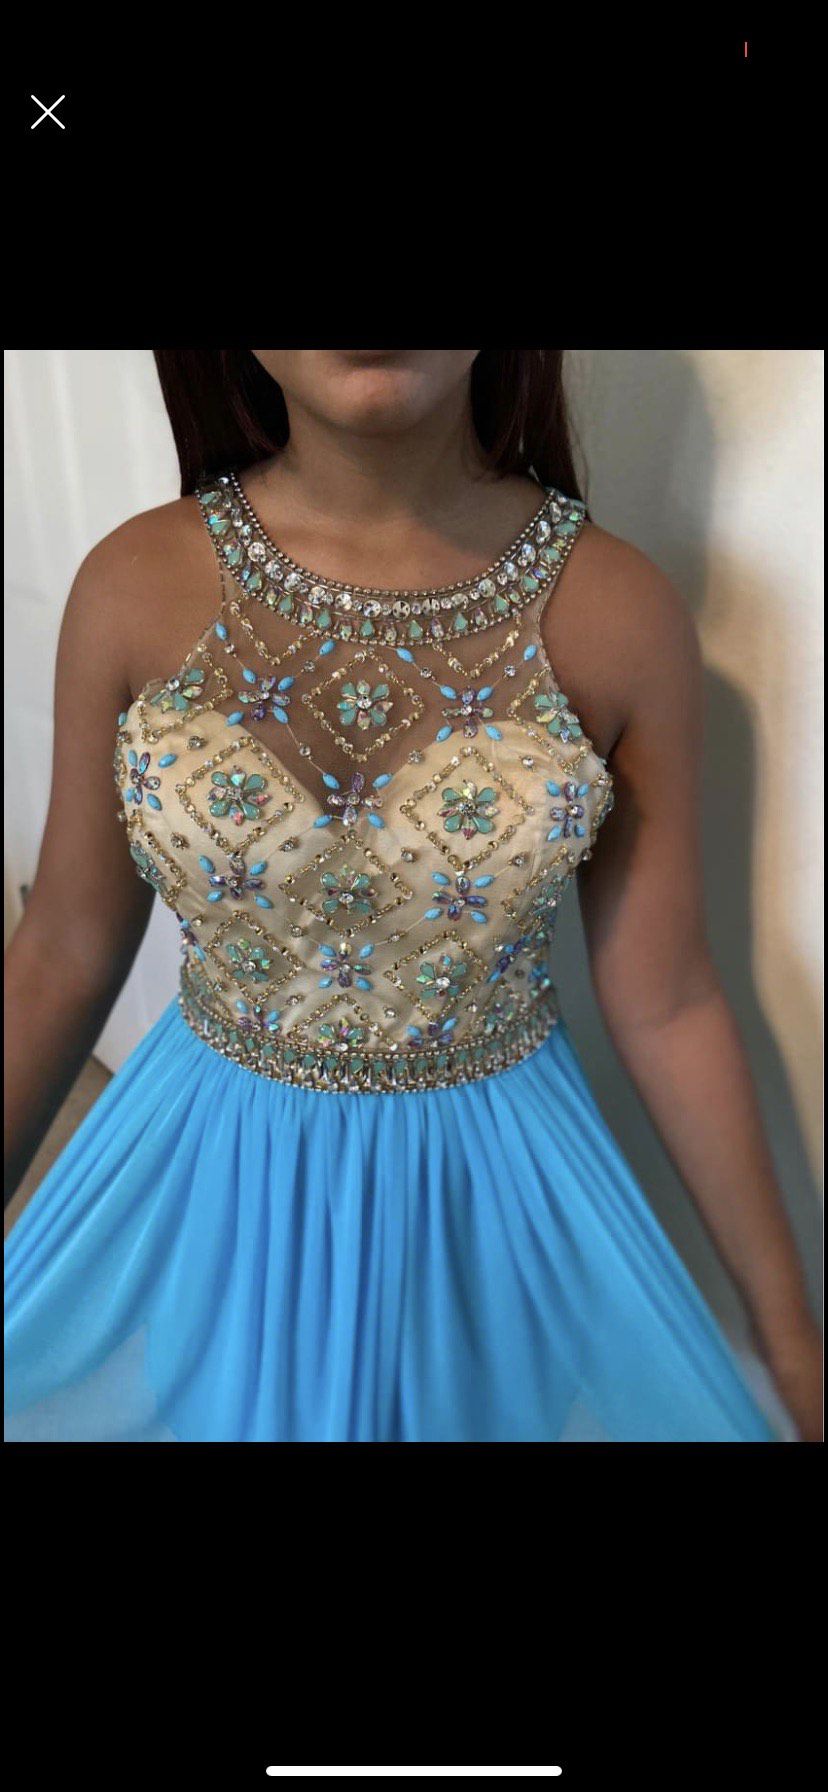 Girls Size 5 Homecoming High Neck Sequined Light Blue A-line Dress on Queenly